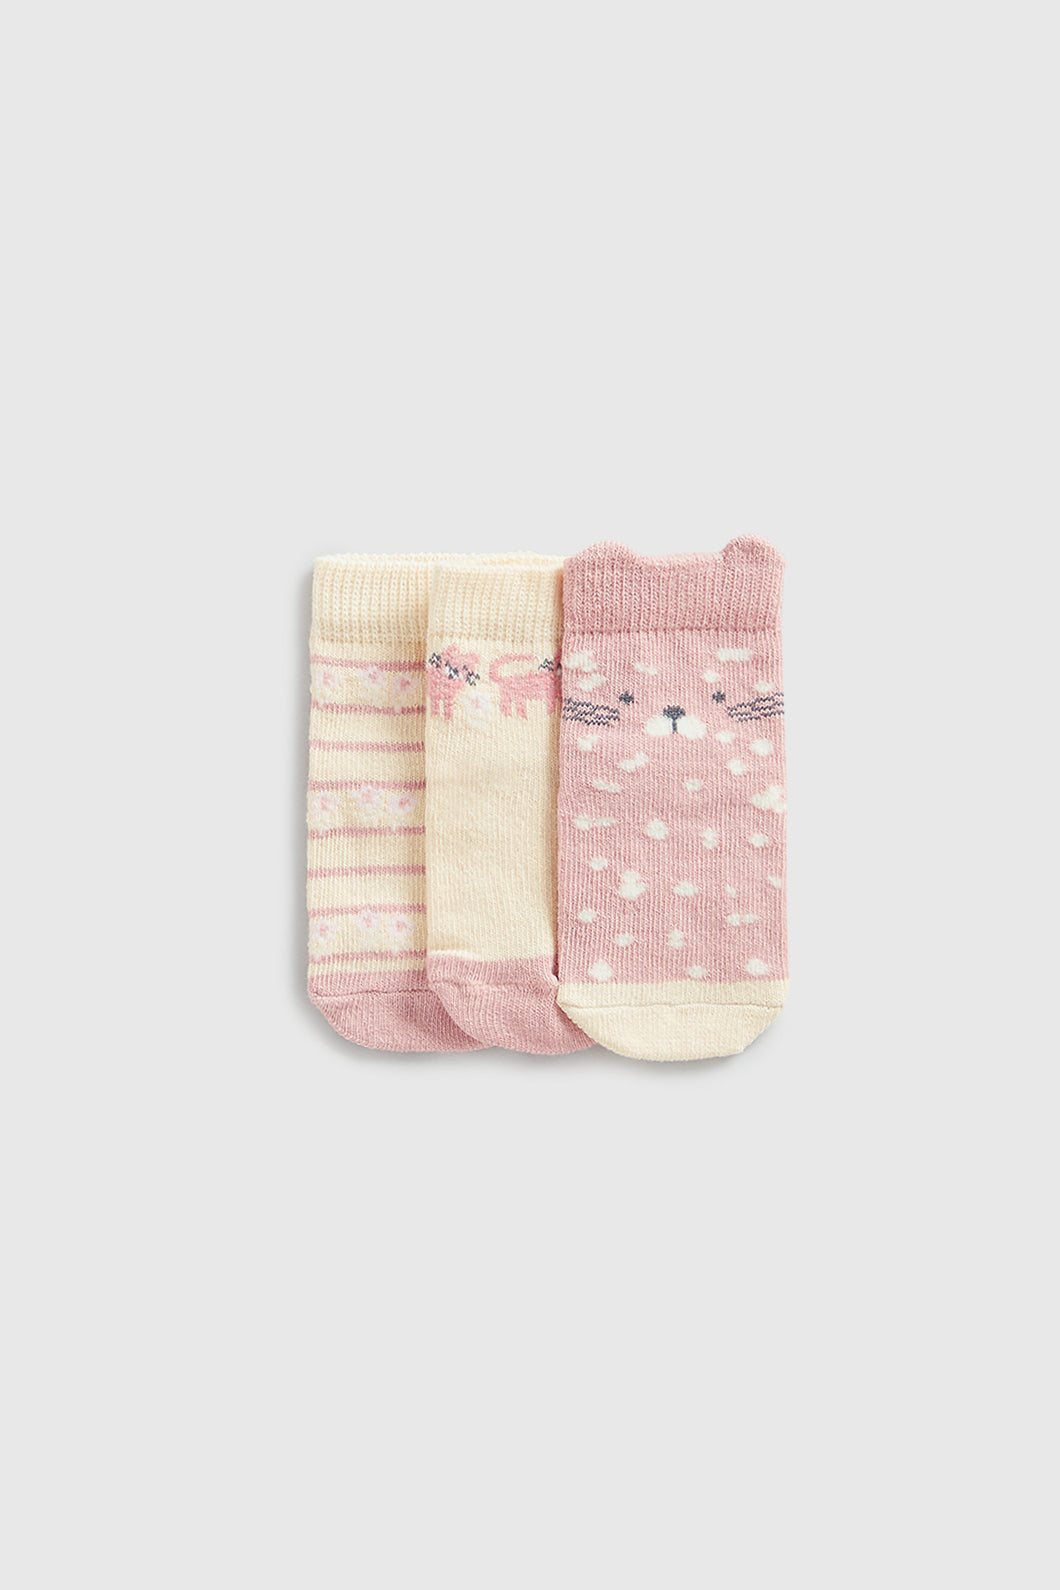 Mothercare Pink Leopard Baby Socks - 3 Pack